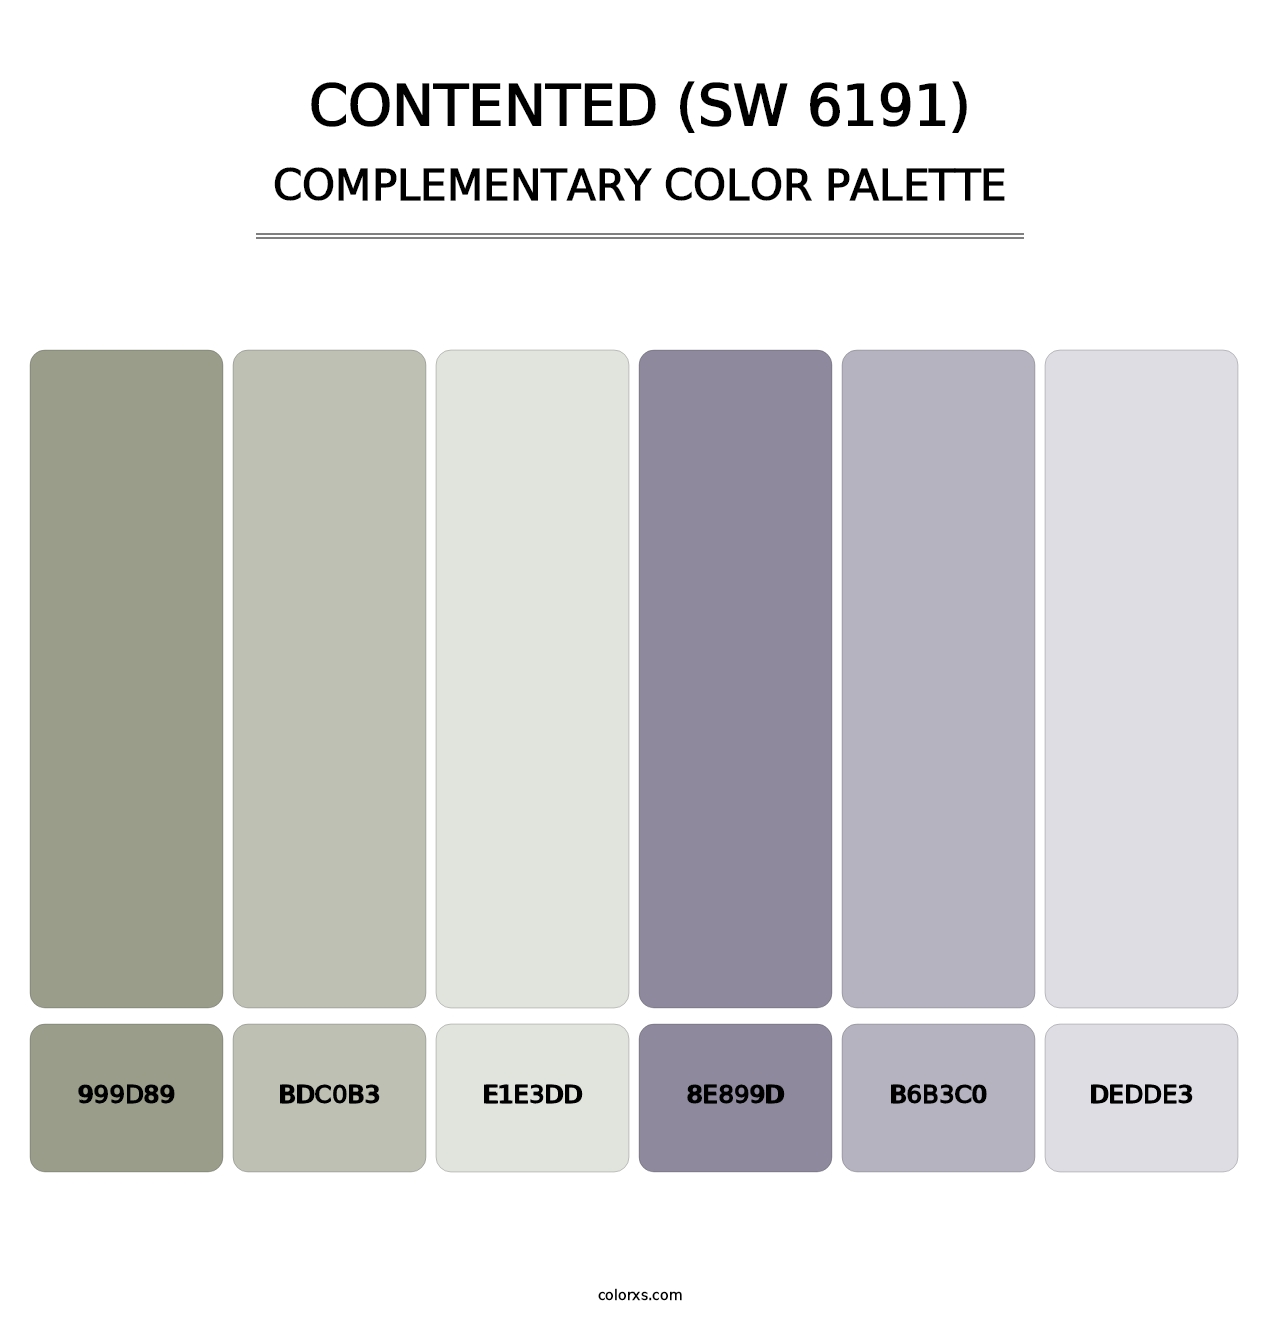 Contented (SW 6191) - Complementary Color Palette